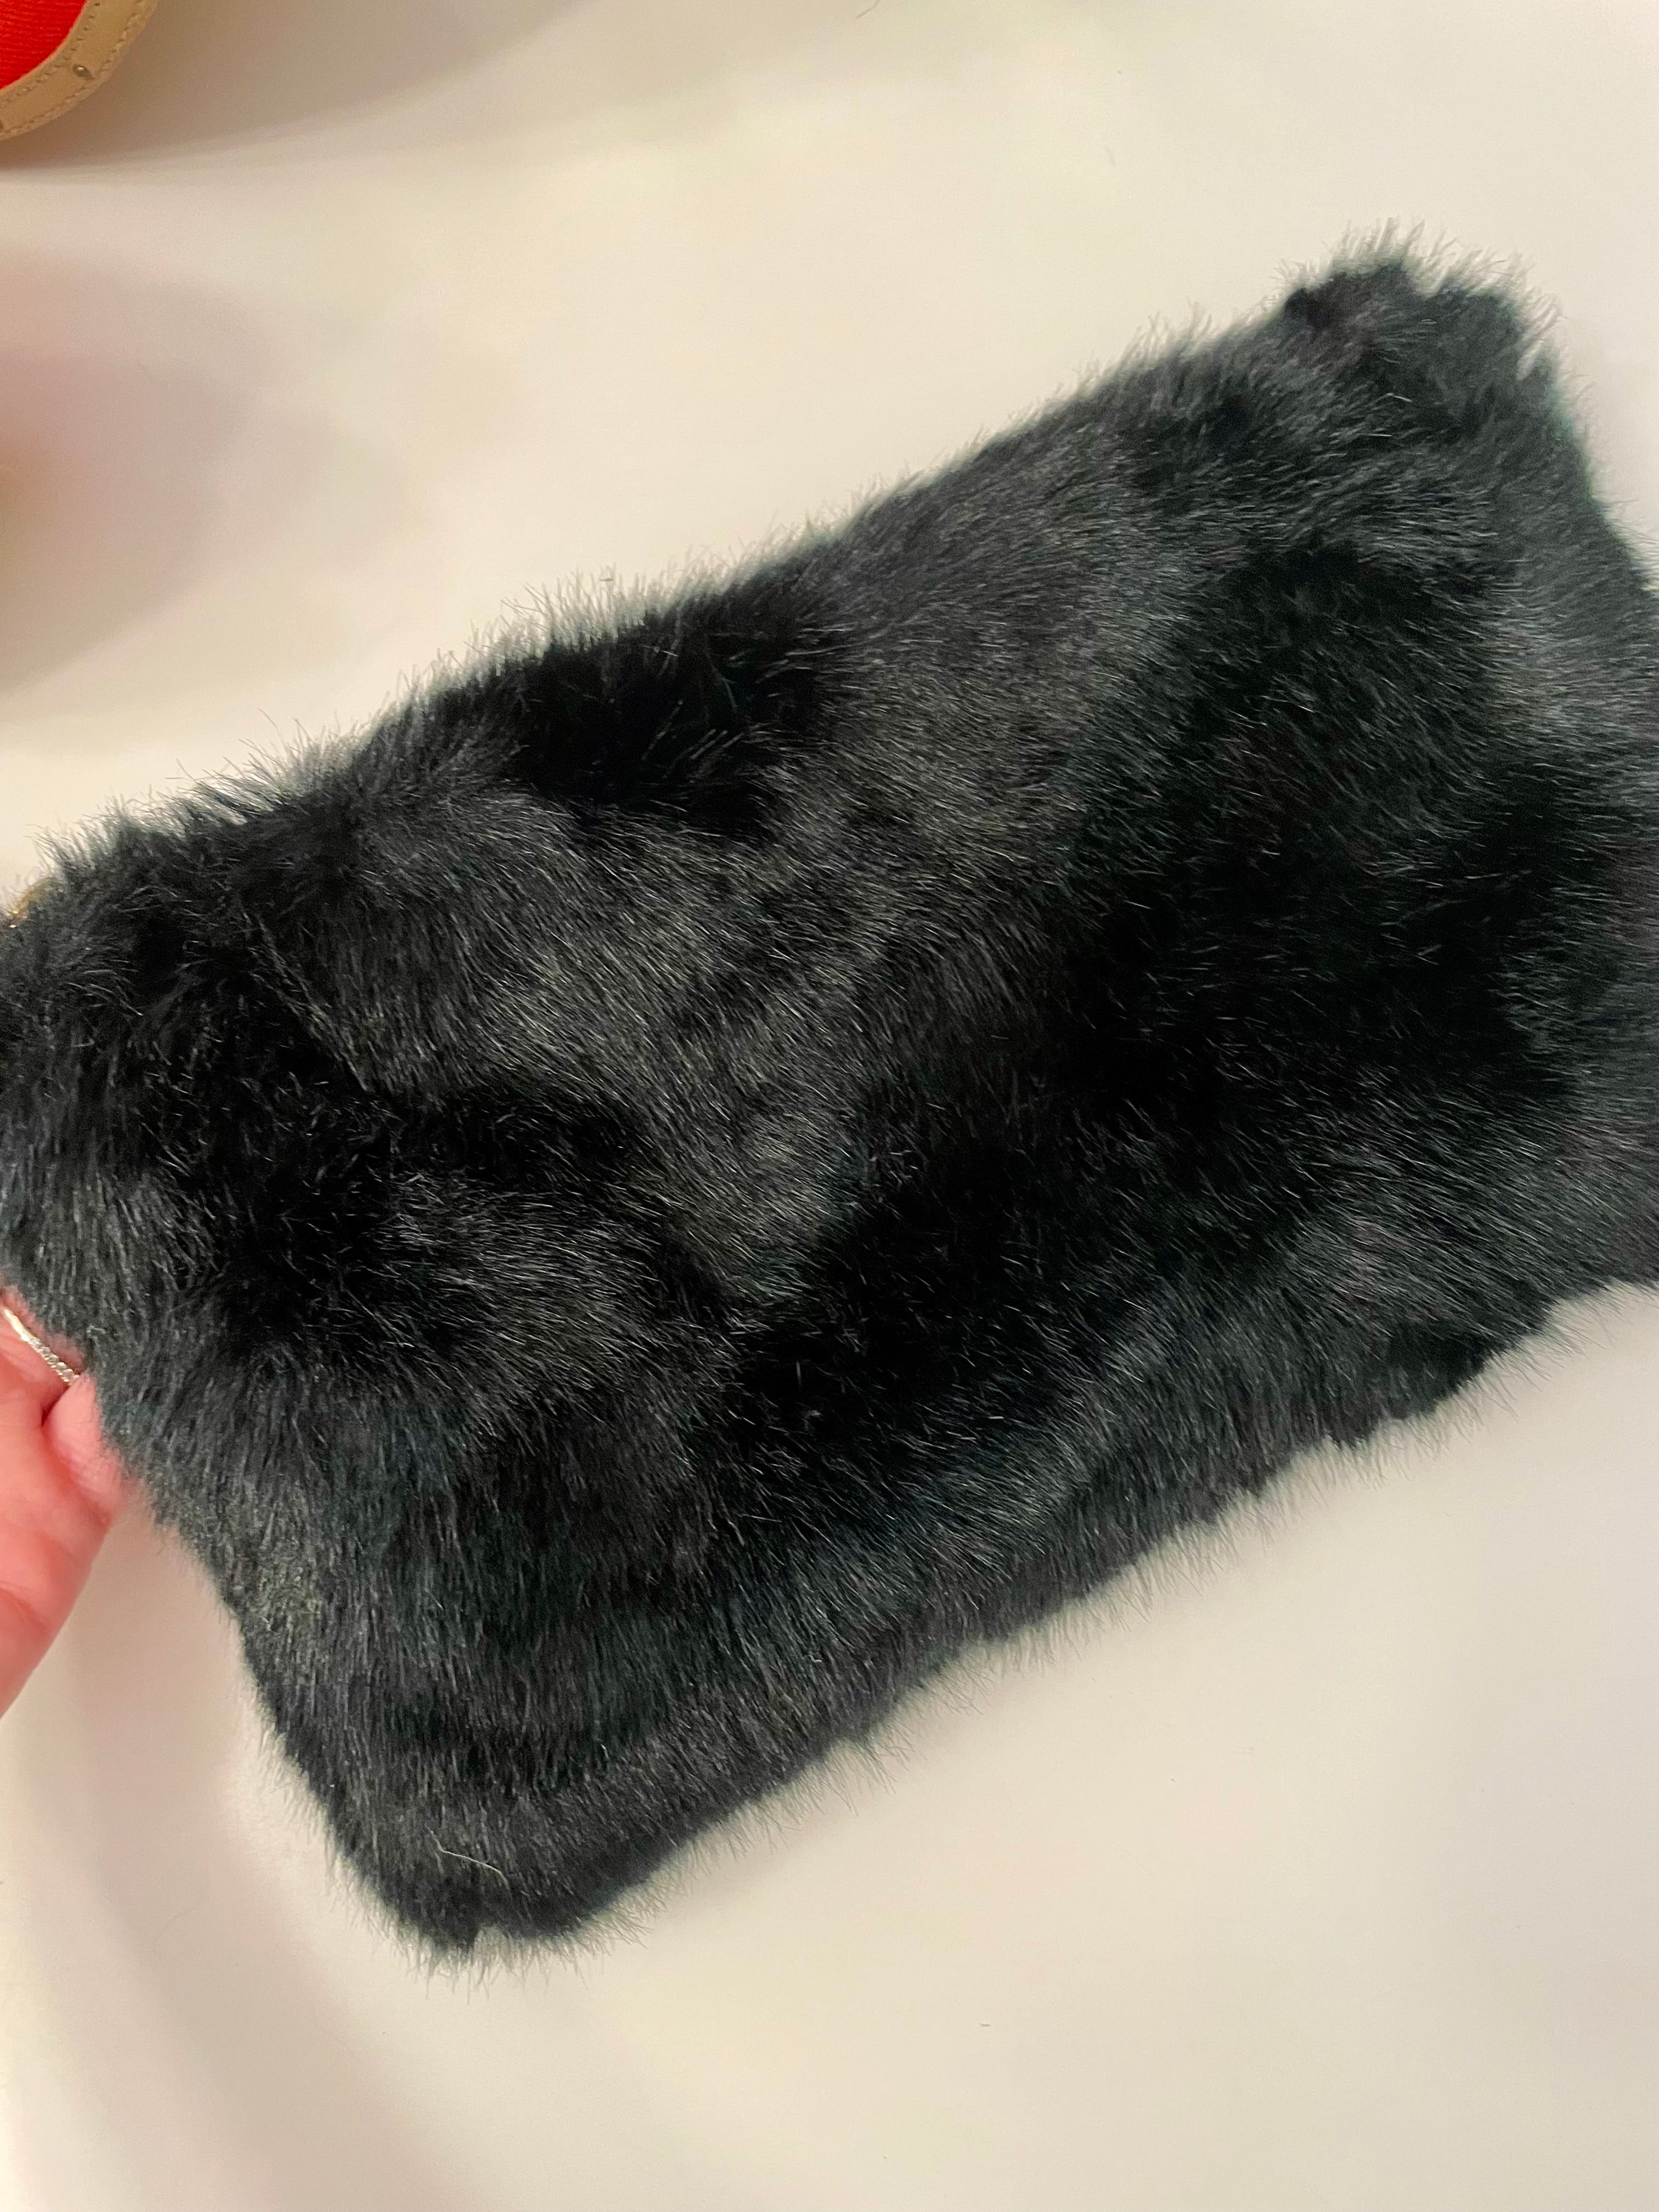 Ladies on Holiday, and her love of a classy evening bag! This noir faux fur clutch bag is so charming..